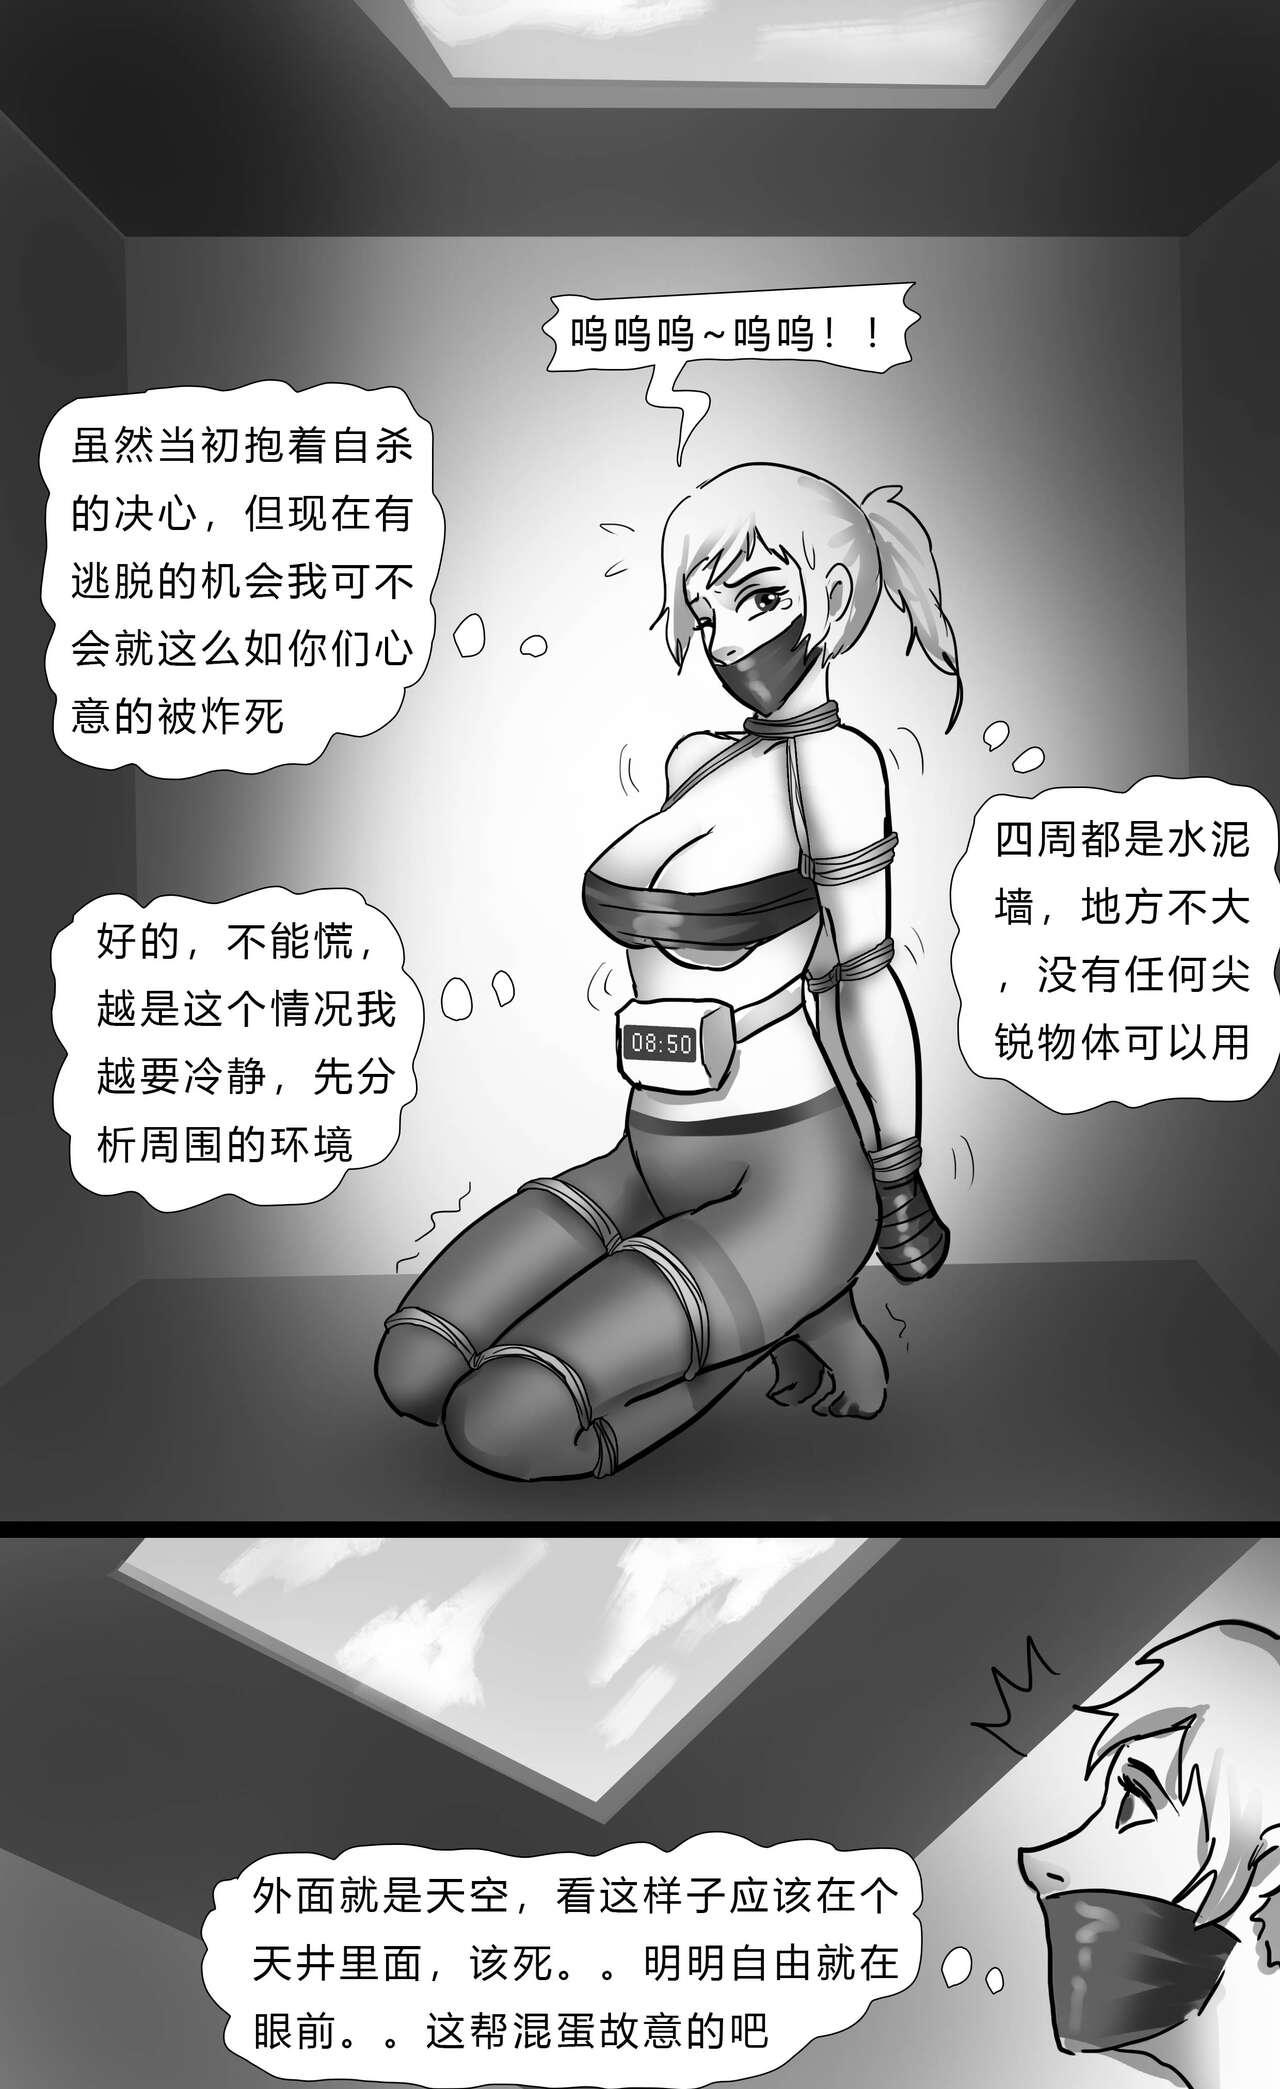 Piss 致命倒计时 Deadly Countdown Flashing - Page 5